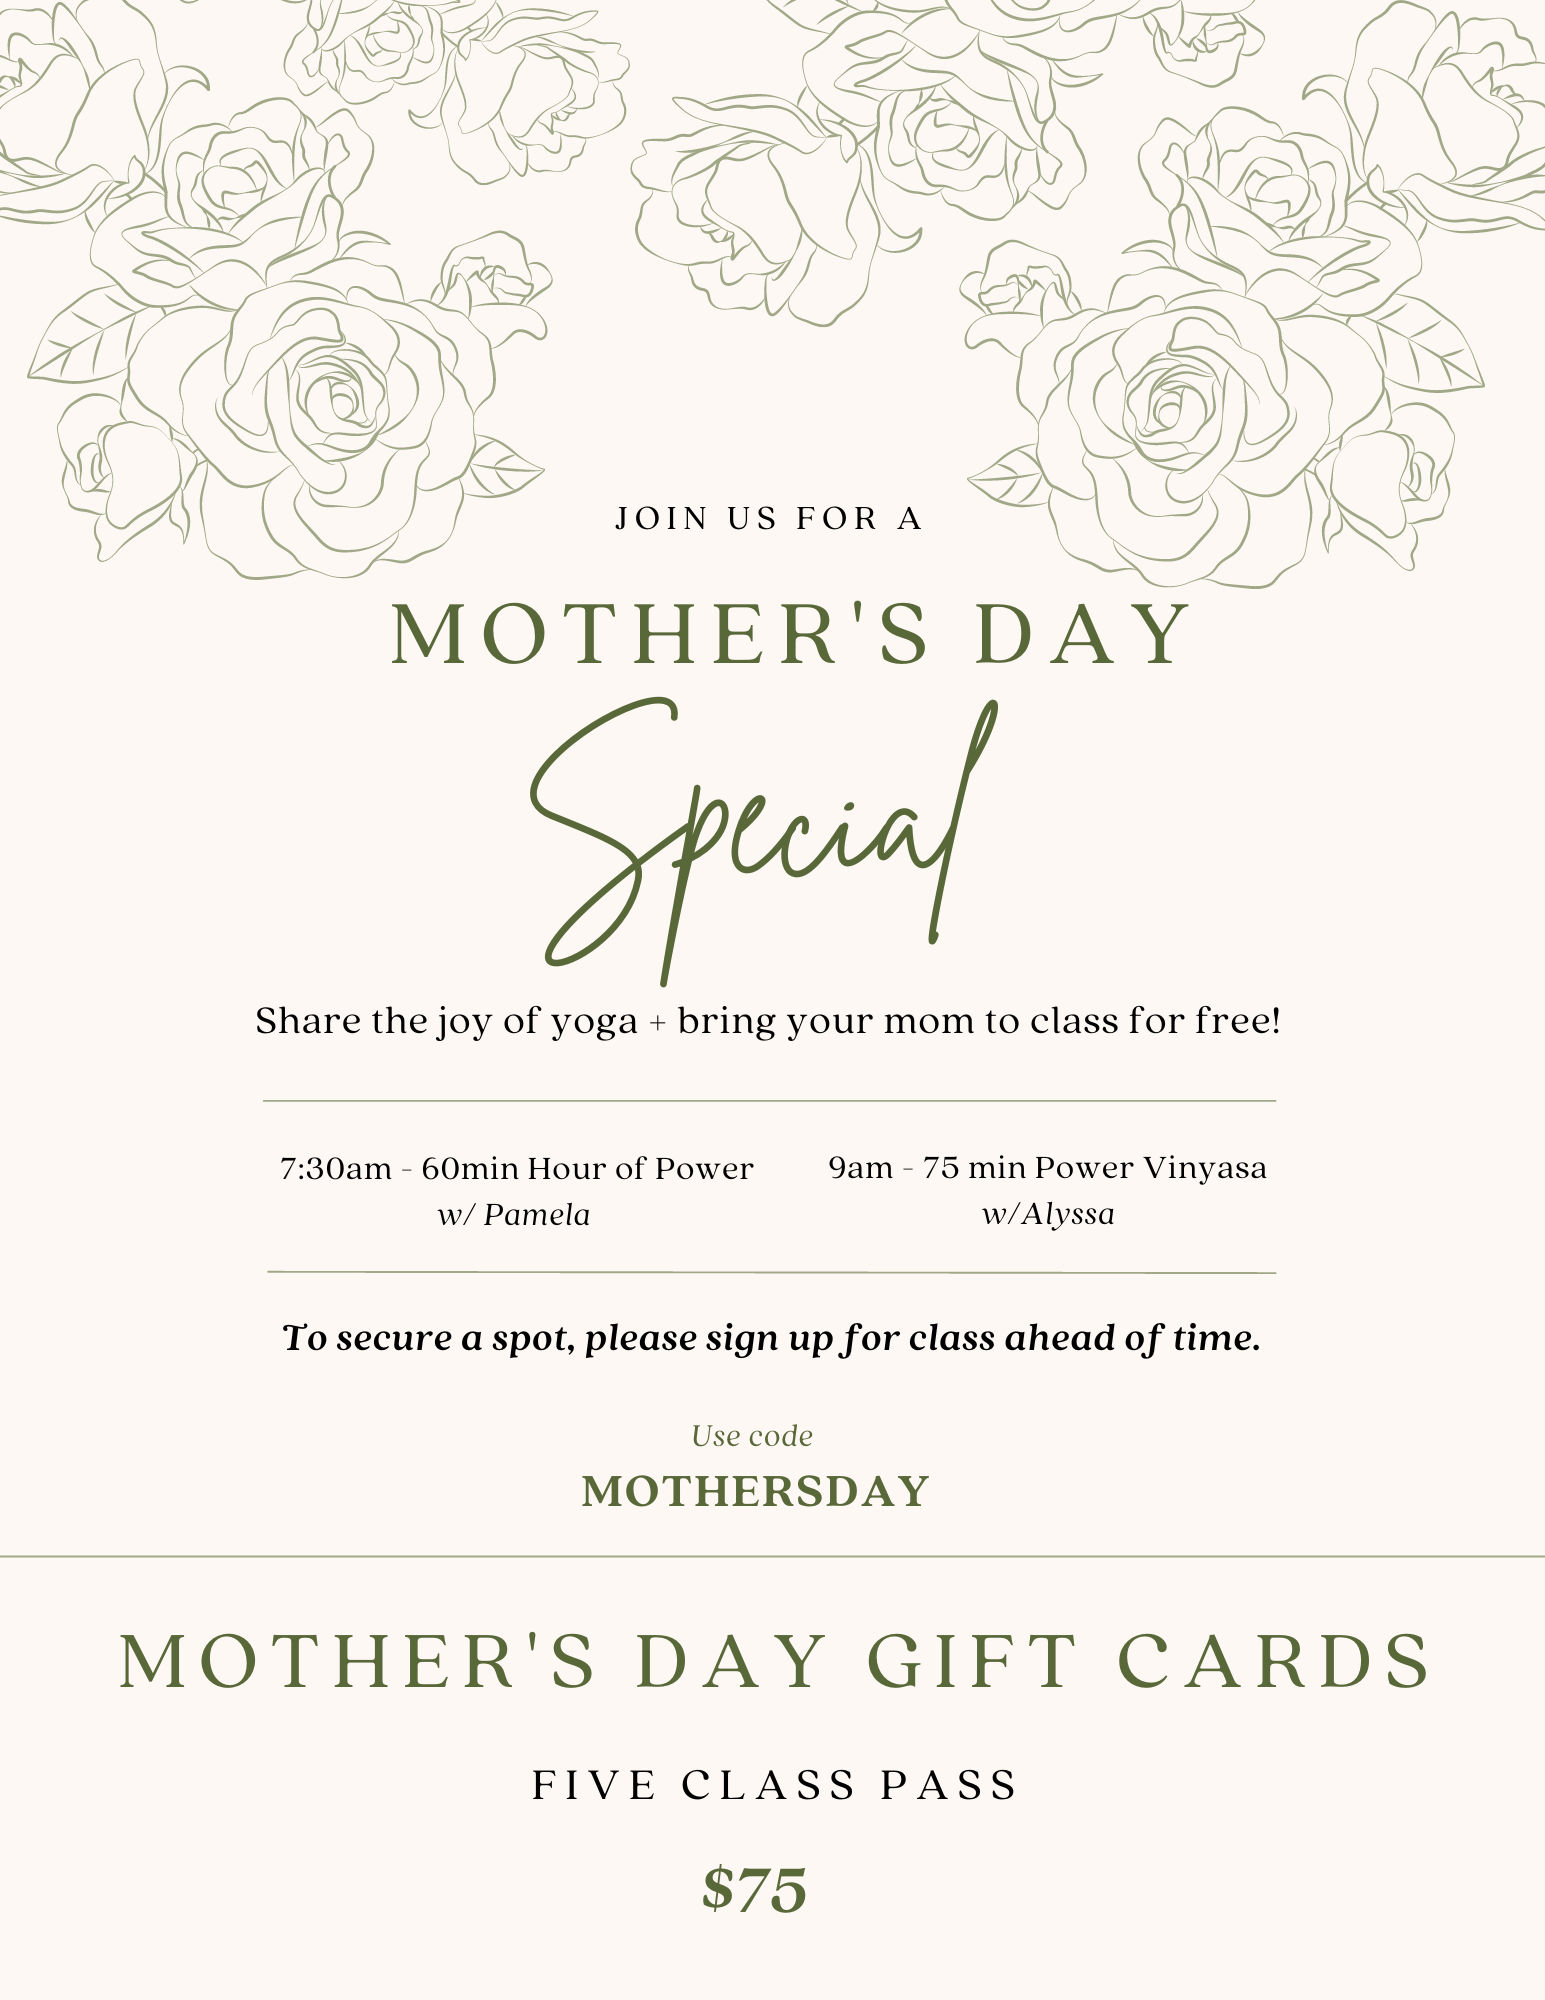 Mother's Day Flyer.png